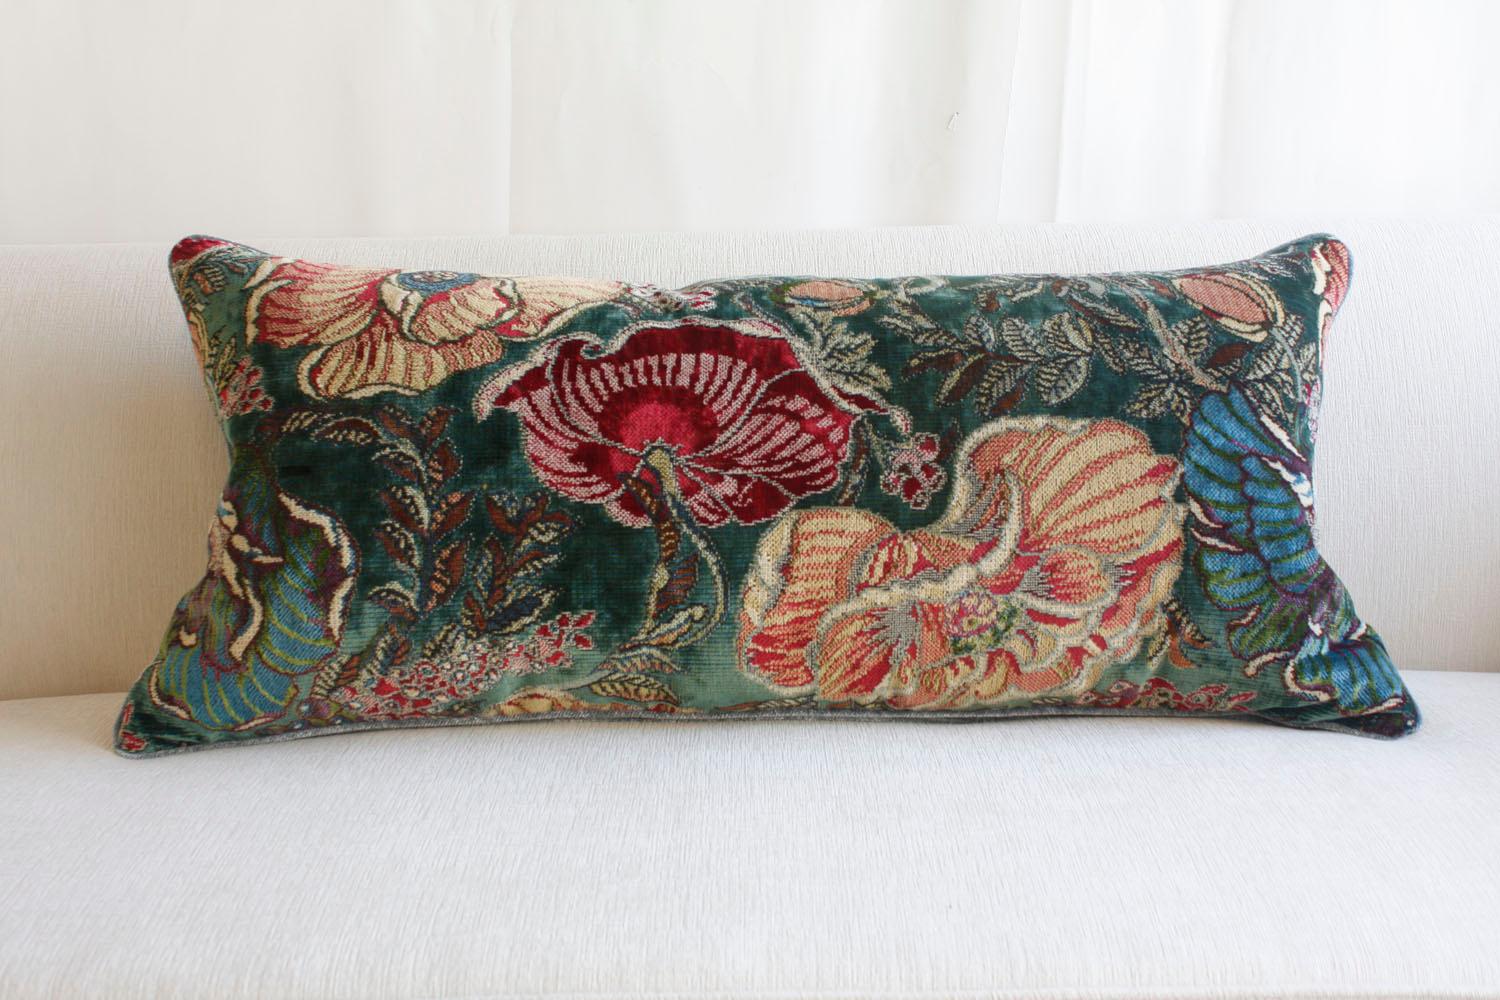 Hand-Crafted 1910s Vintage Botanical Velvet Pillows: Charm & Comfort for Any Home For Sale